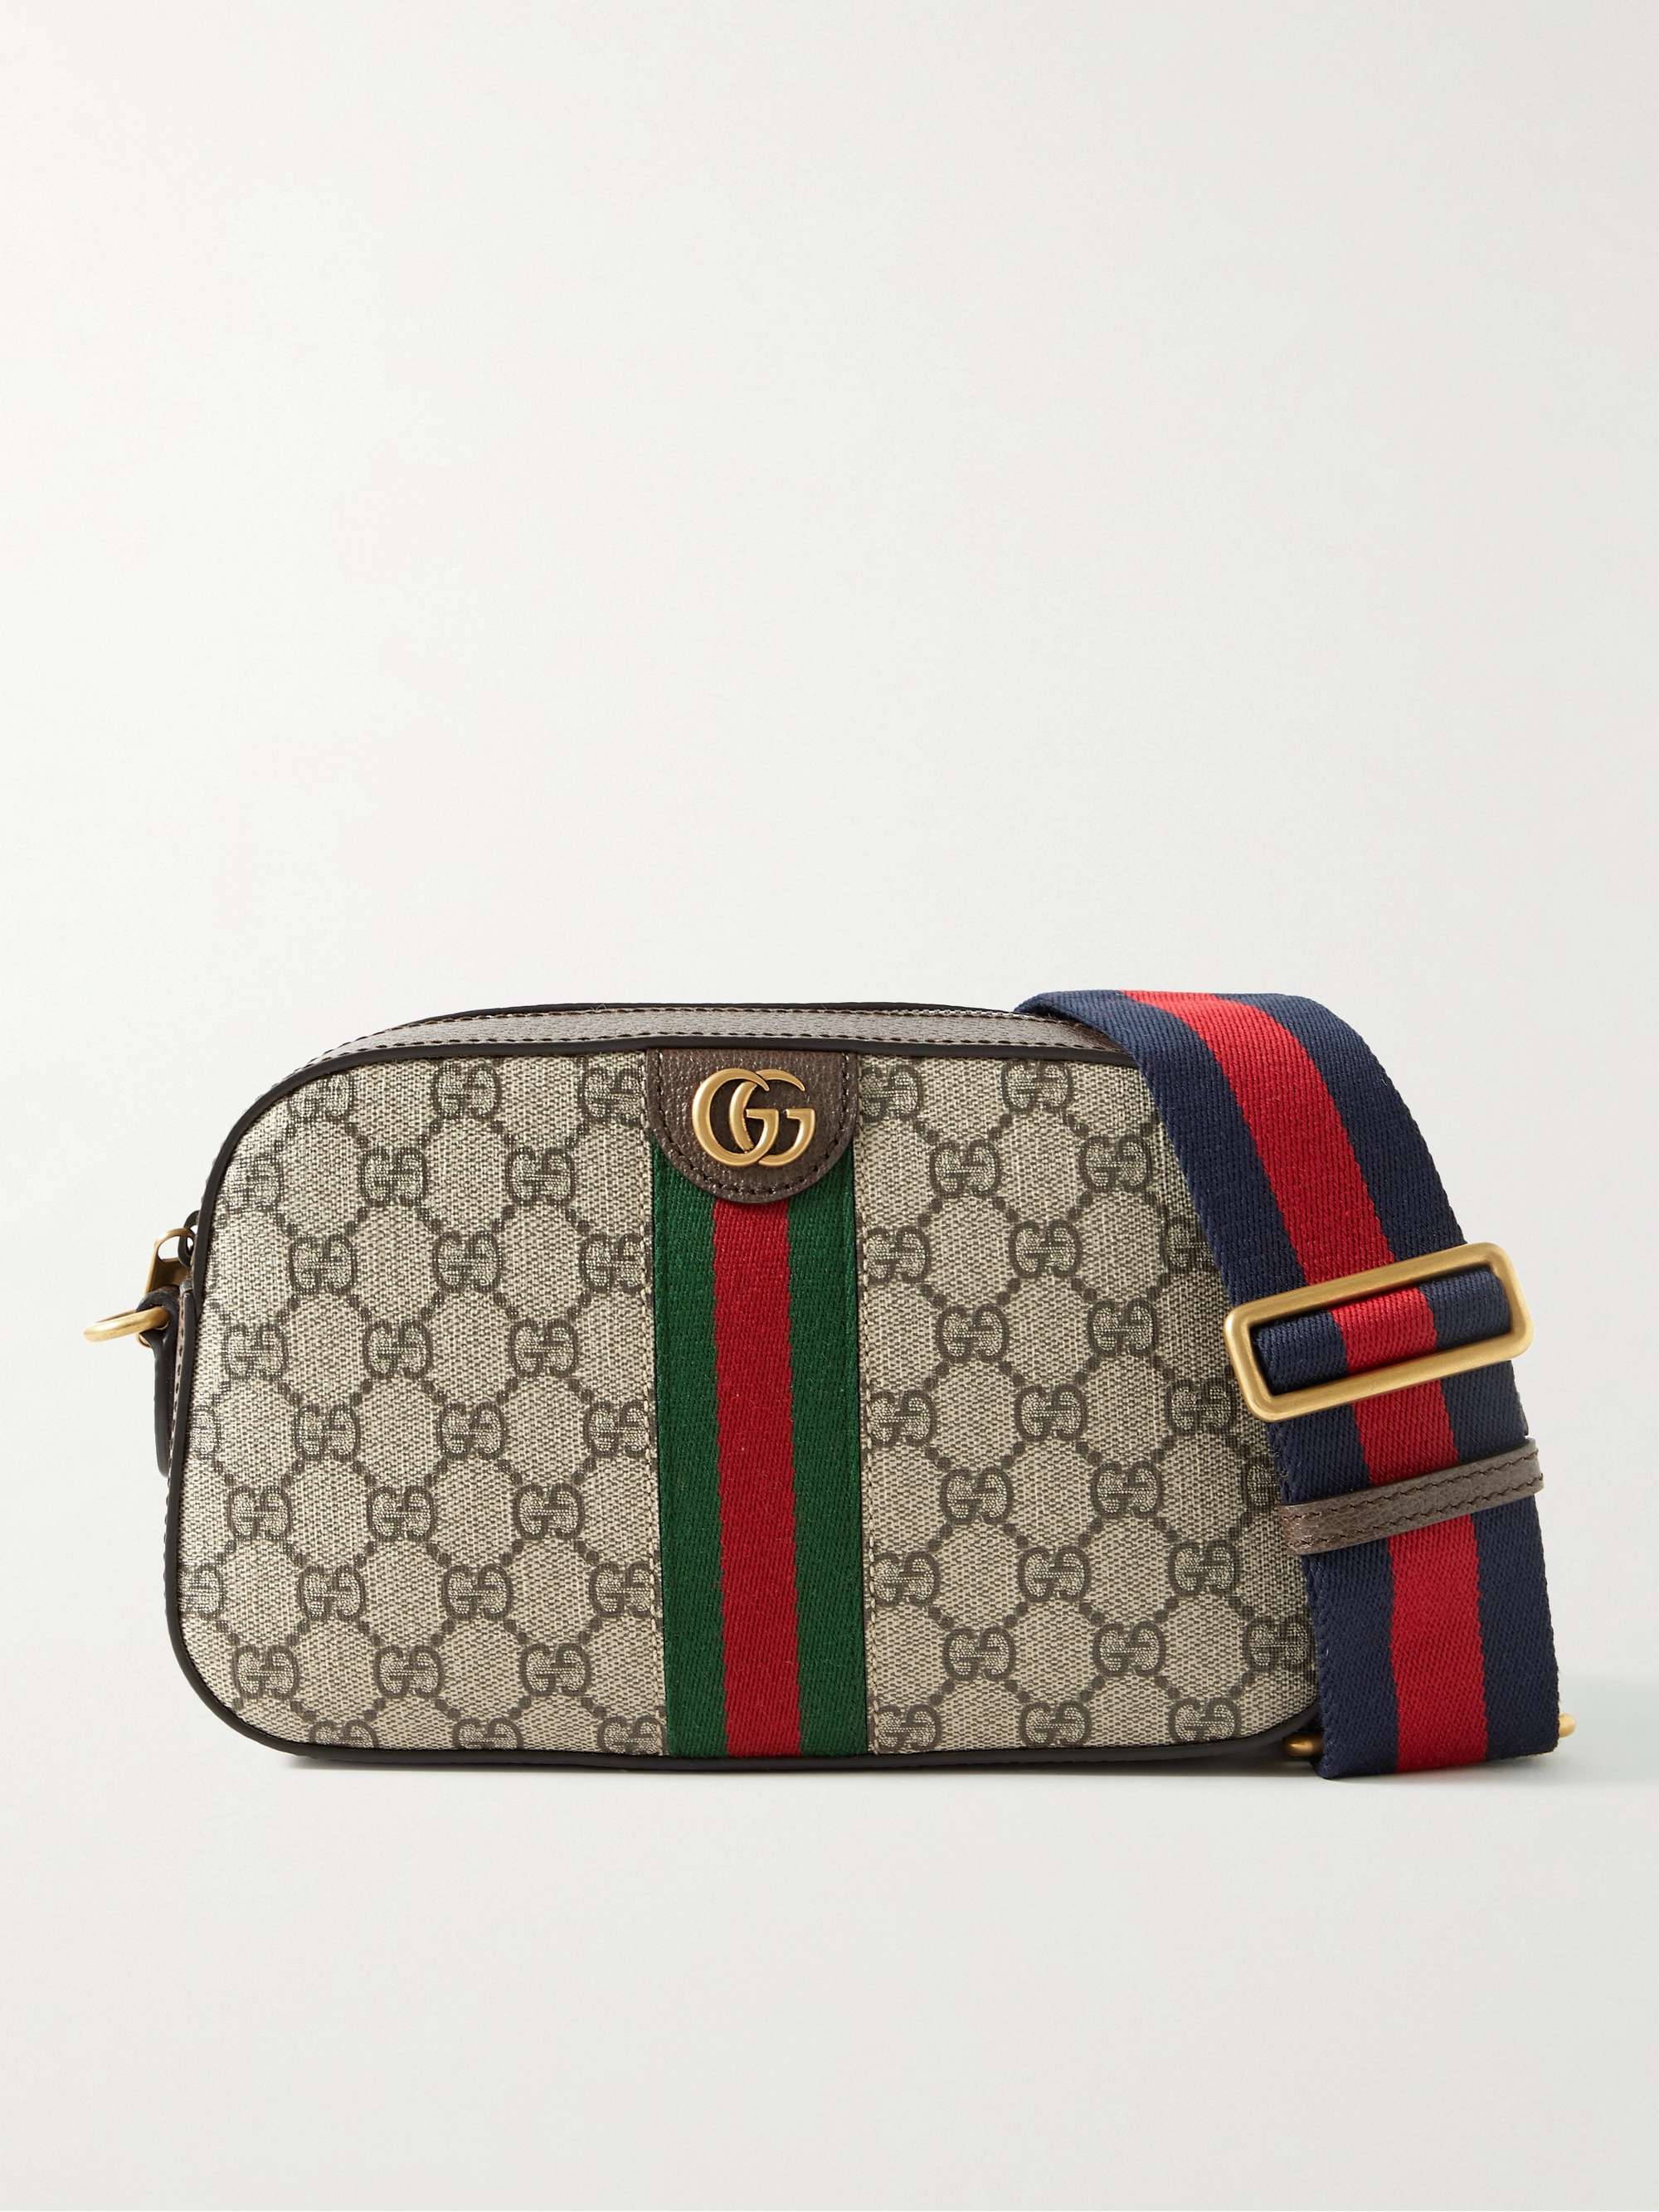 Gucci Ophidia Leather-Trimmed Printed Coated-Canvas Shoulder Bag